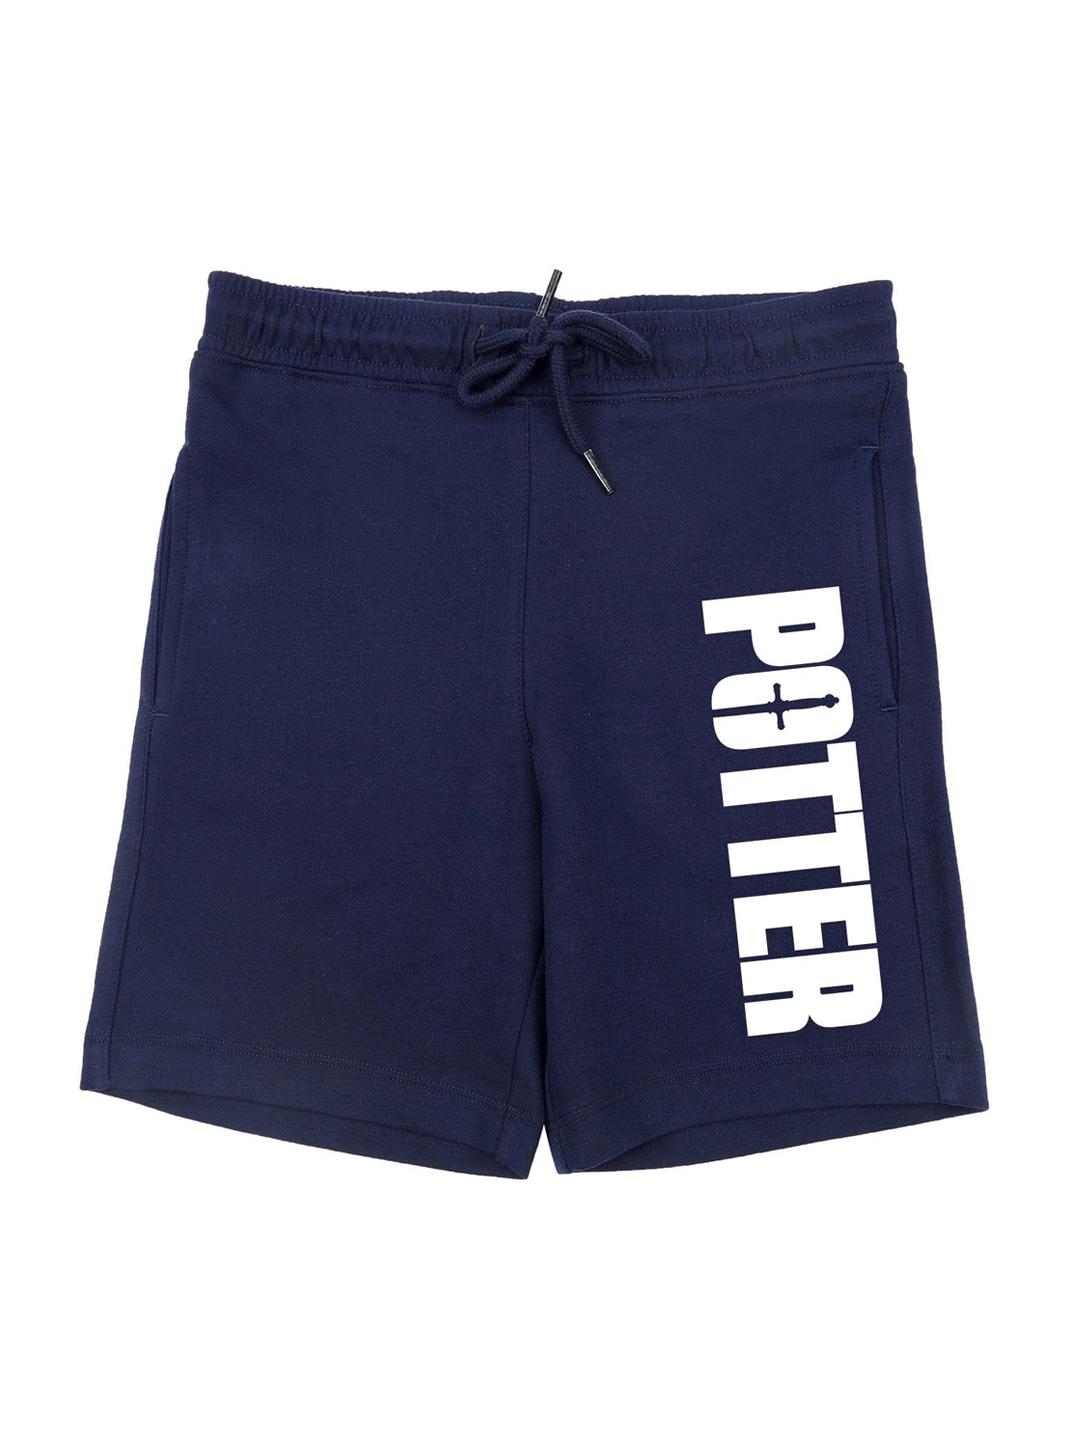 harry potter by wear your mind boys navy blue typography printed harry potter shorts